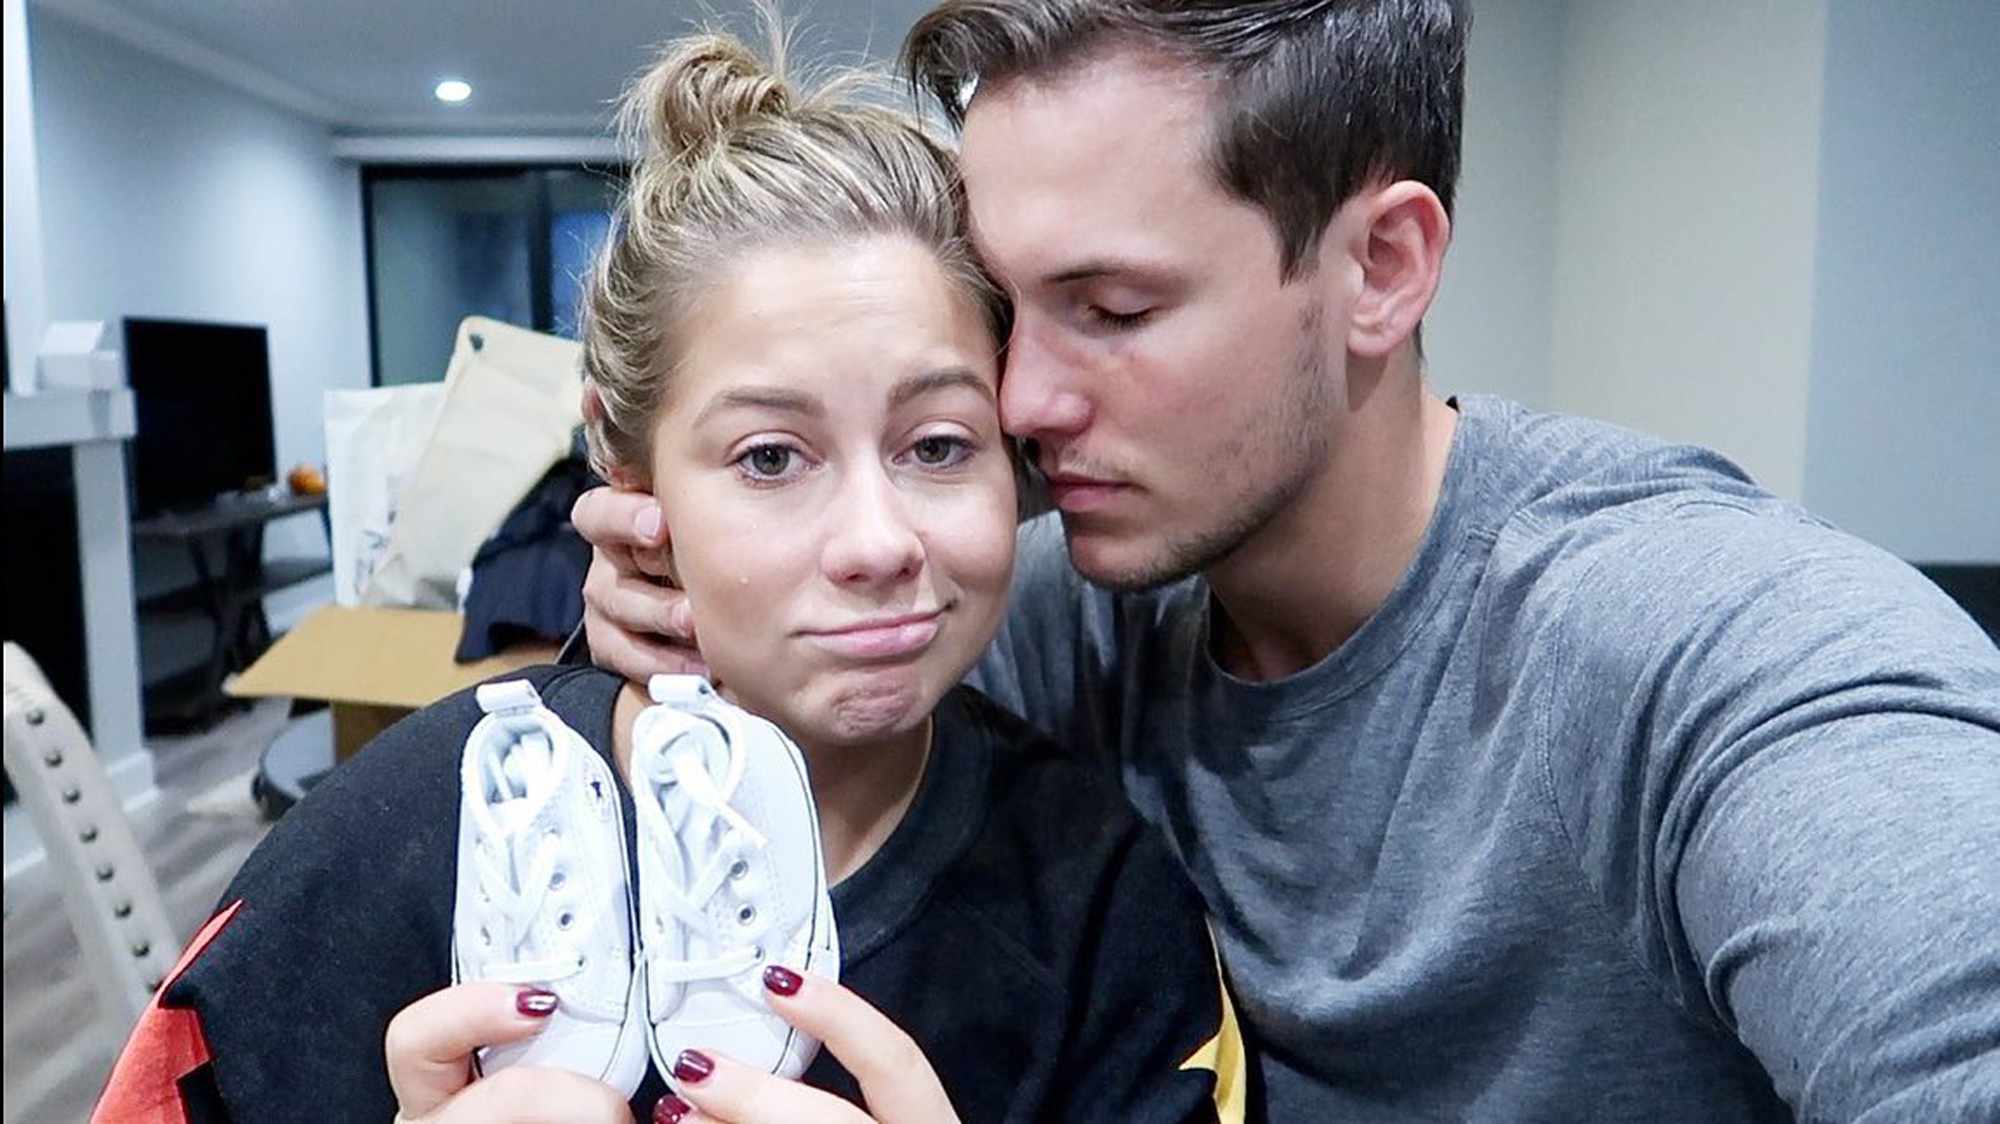 Shawn Johnson and Andrew East